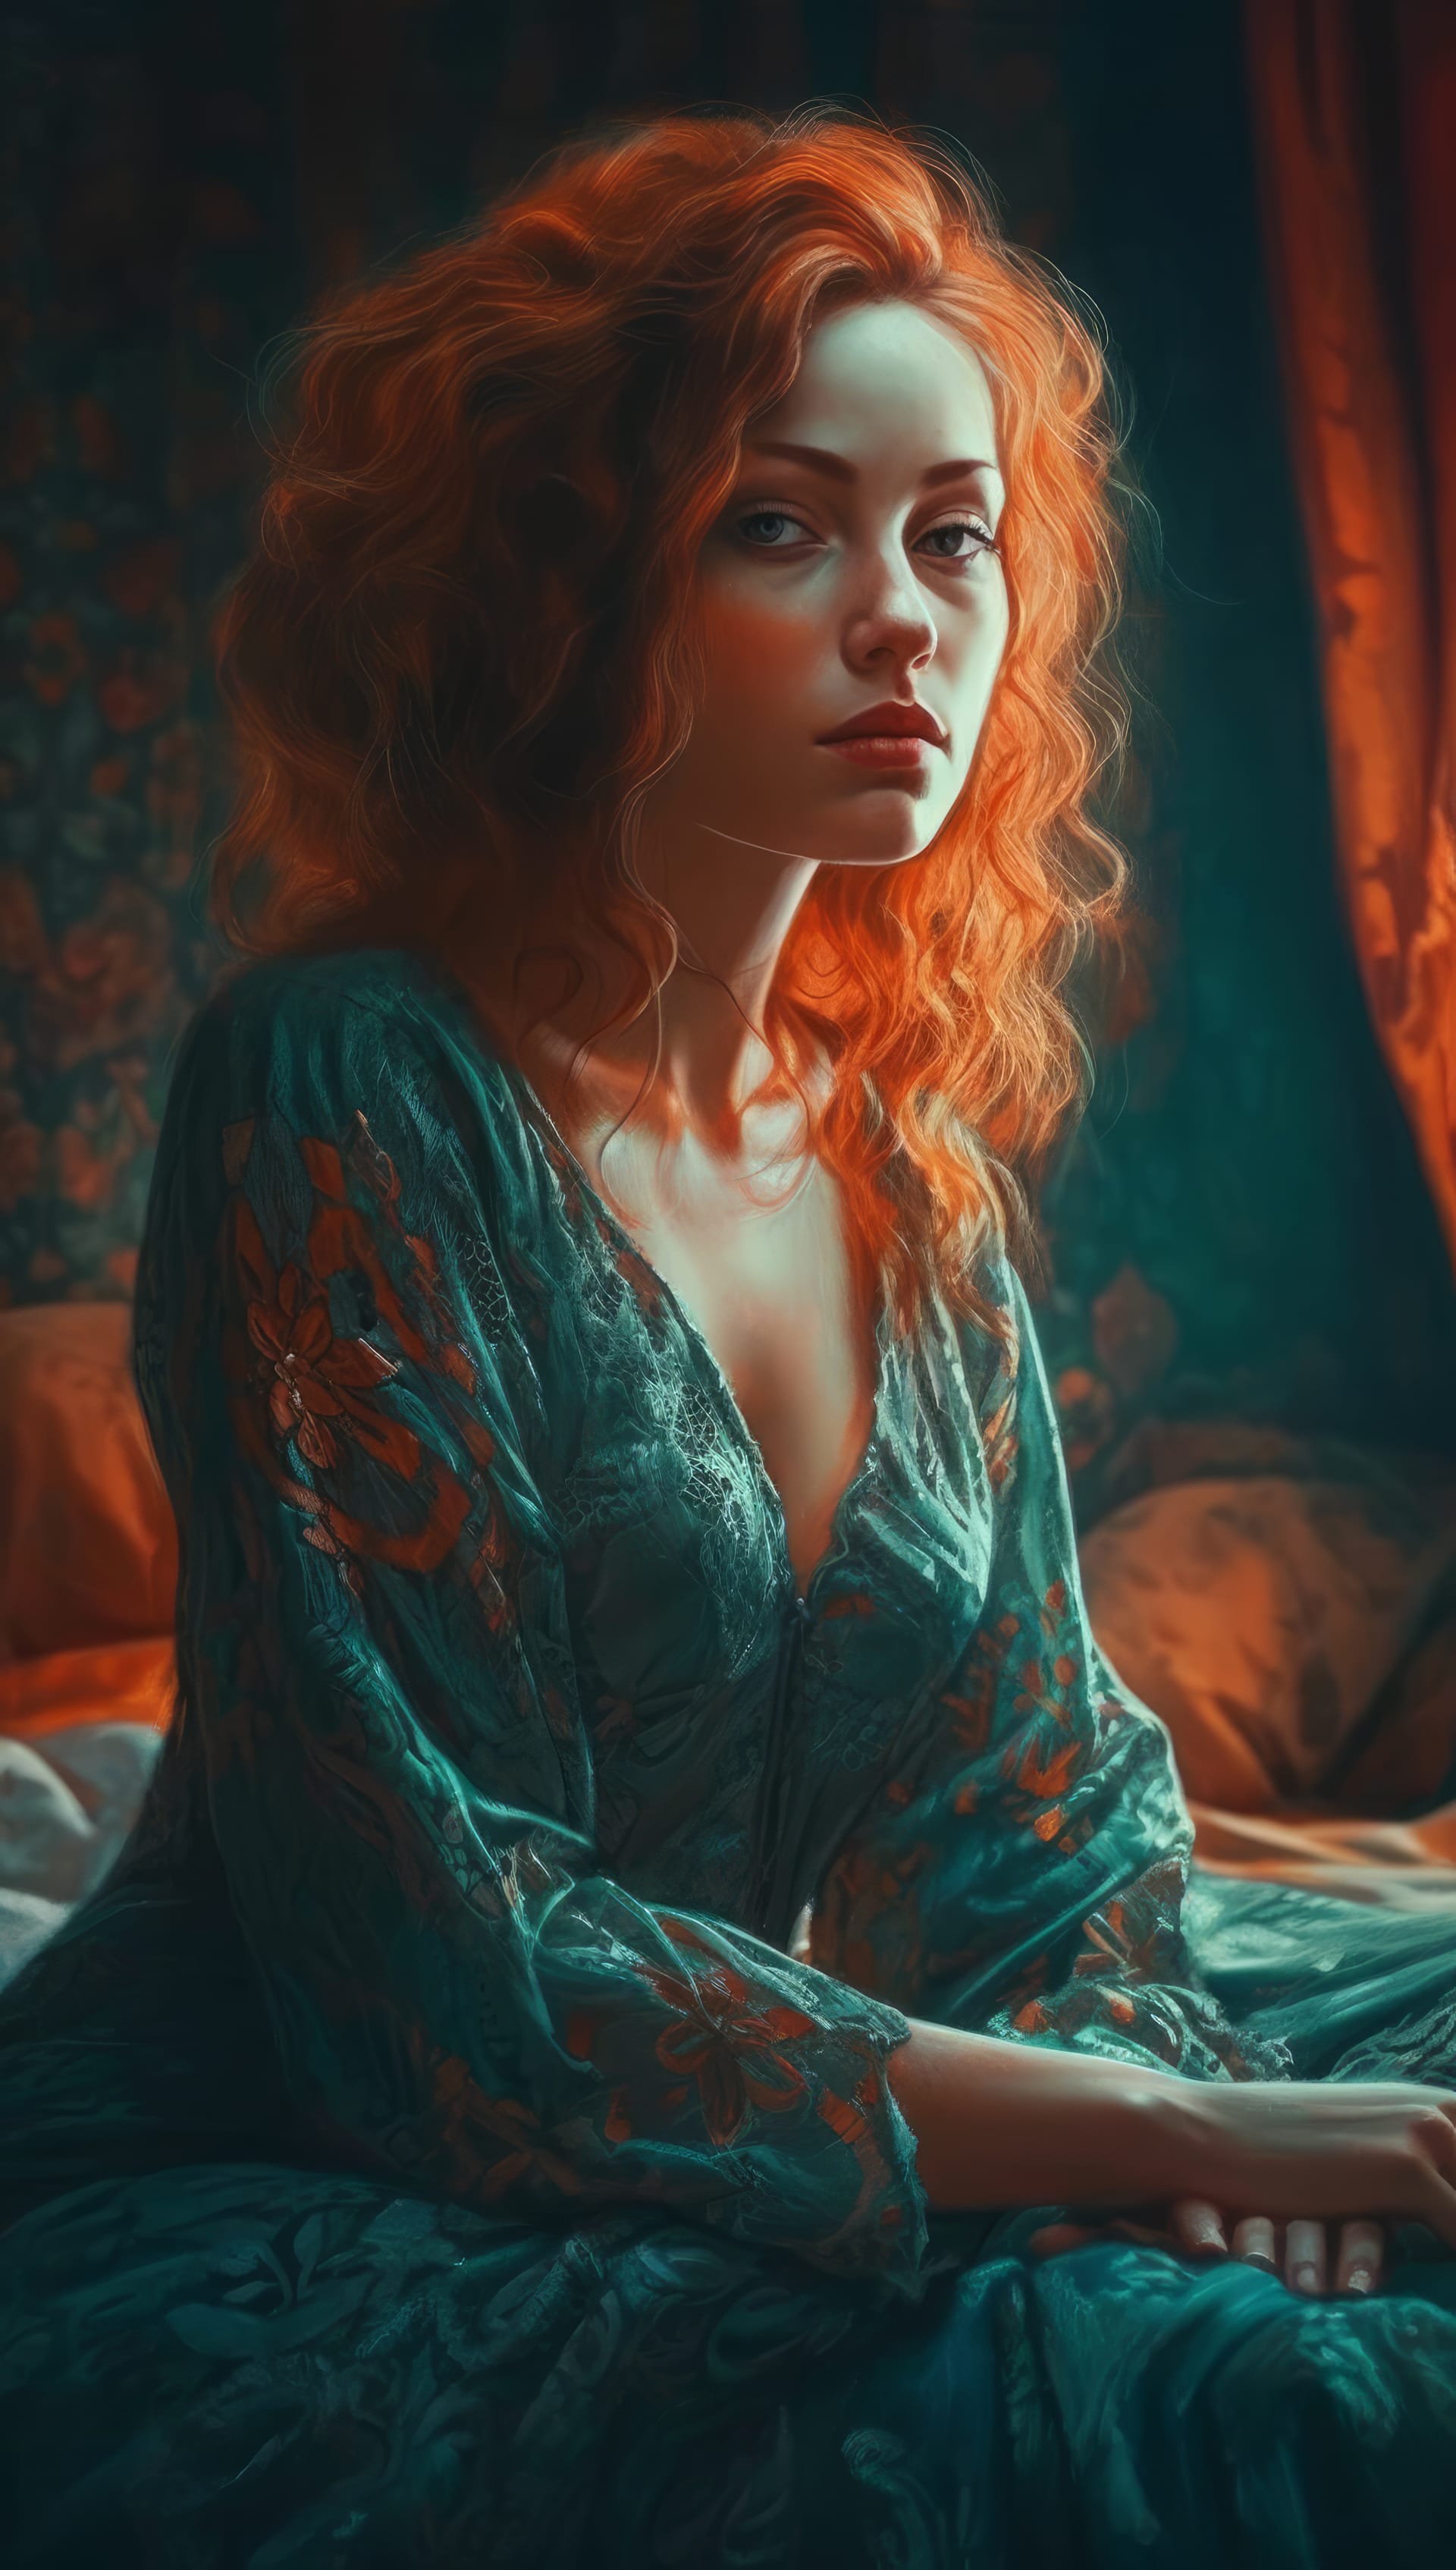 Bright portrait young woman with red hair sits bed